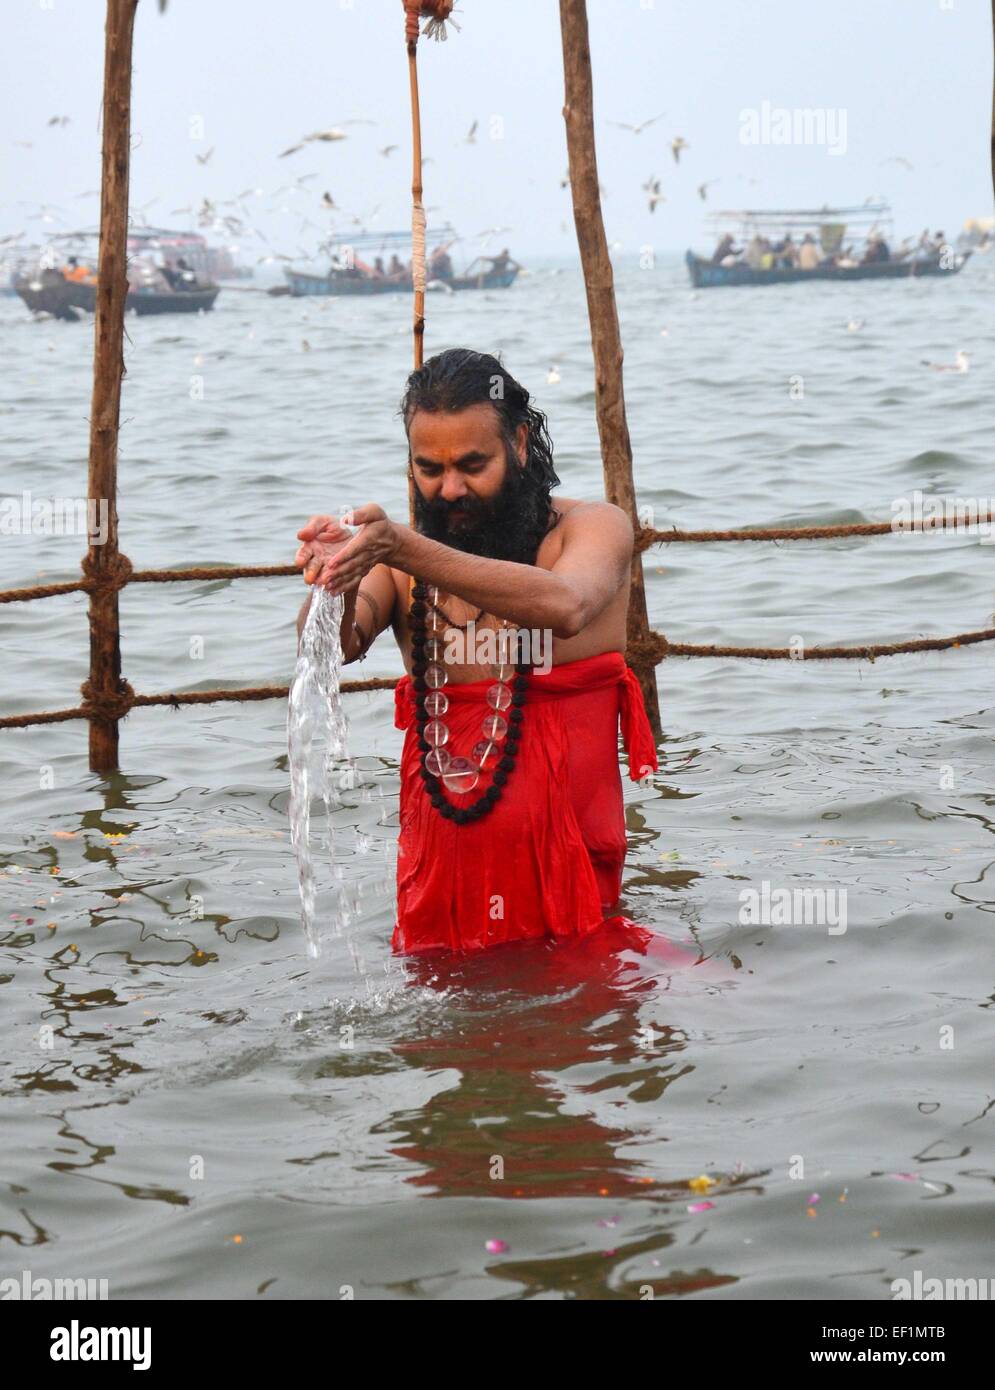 Allahabad: Shankaracharya Narendranand Saraswati offer prayer while taking holydip in water of Sangam on the occasion of 'Basant Panchami' during one month long Magh mela festival in allahabad on 24-01-2015. photo by prabhat kumar verma A Sadhu offers prayer after a holy dip in the waters of Sangam during the ' Basant Panchami', festival that highlights the coming of spring. © Prabhat Kumar Verma/Pacific Press/Alamy Live News Stock Photo